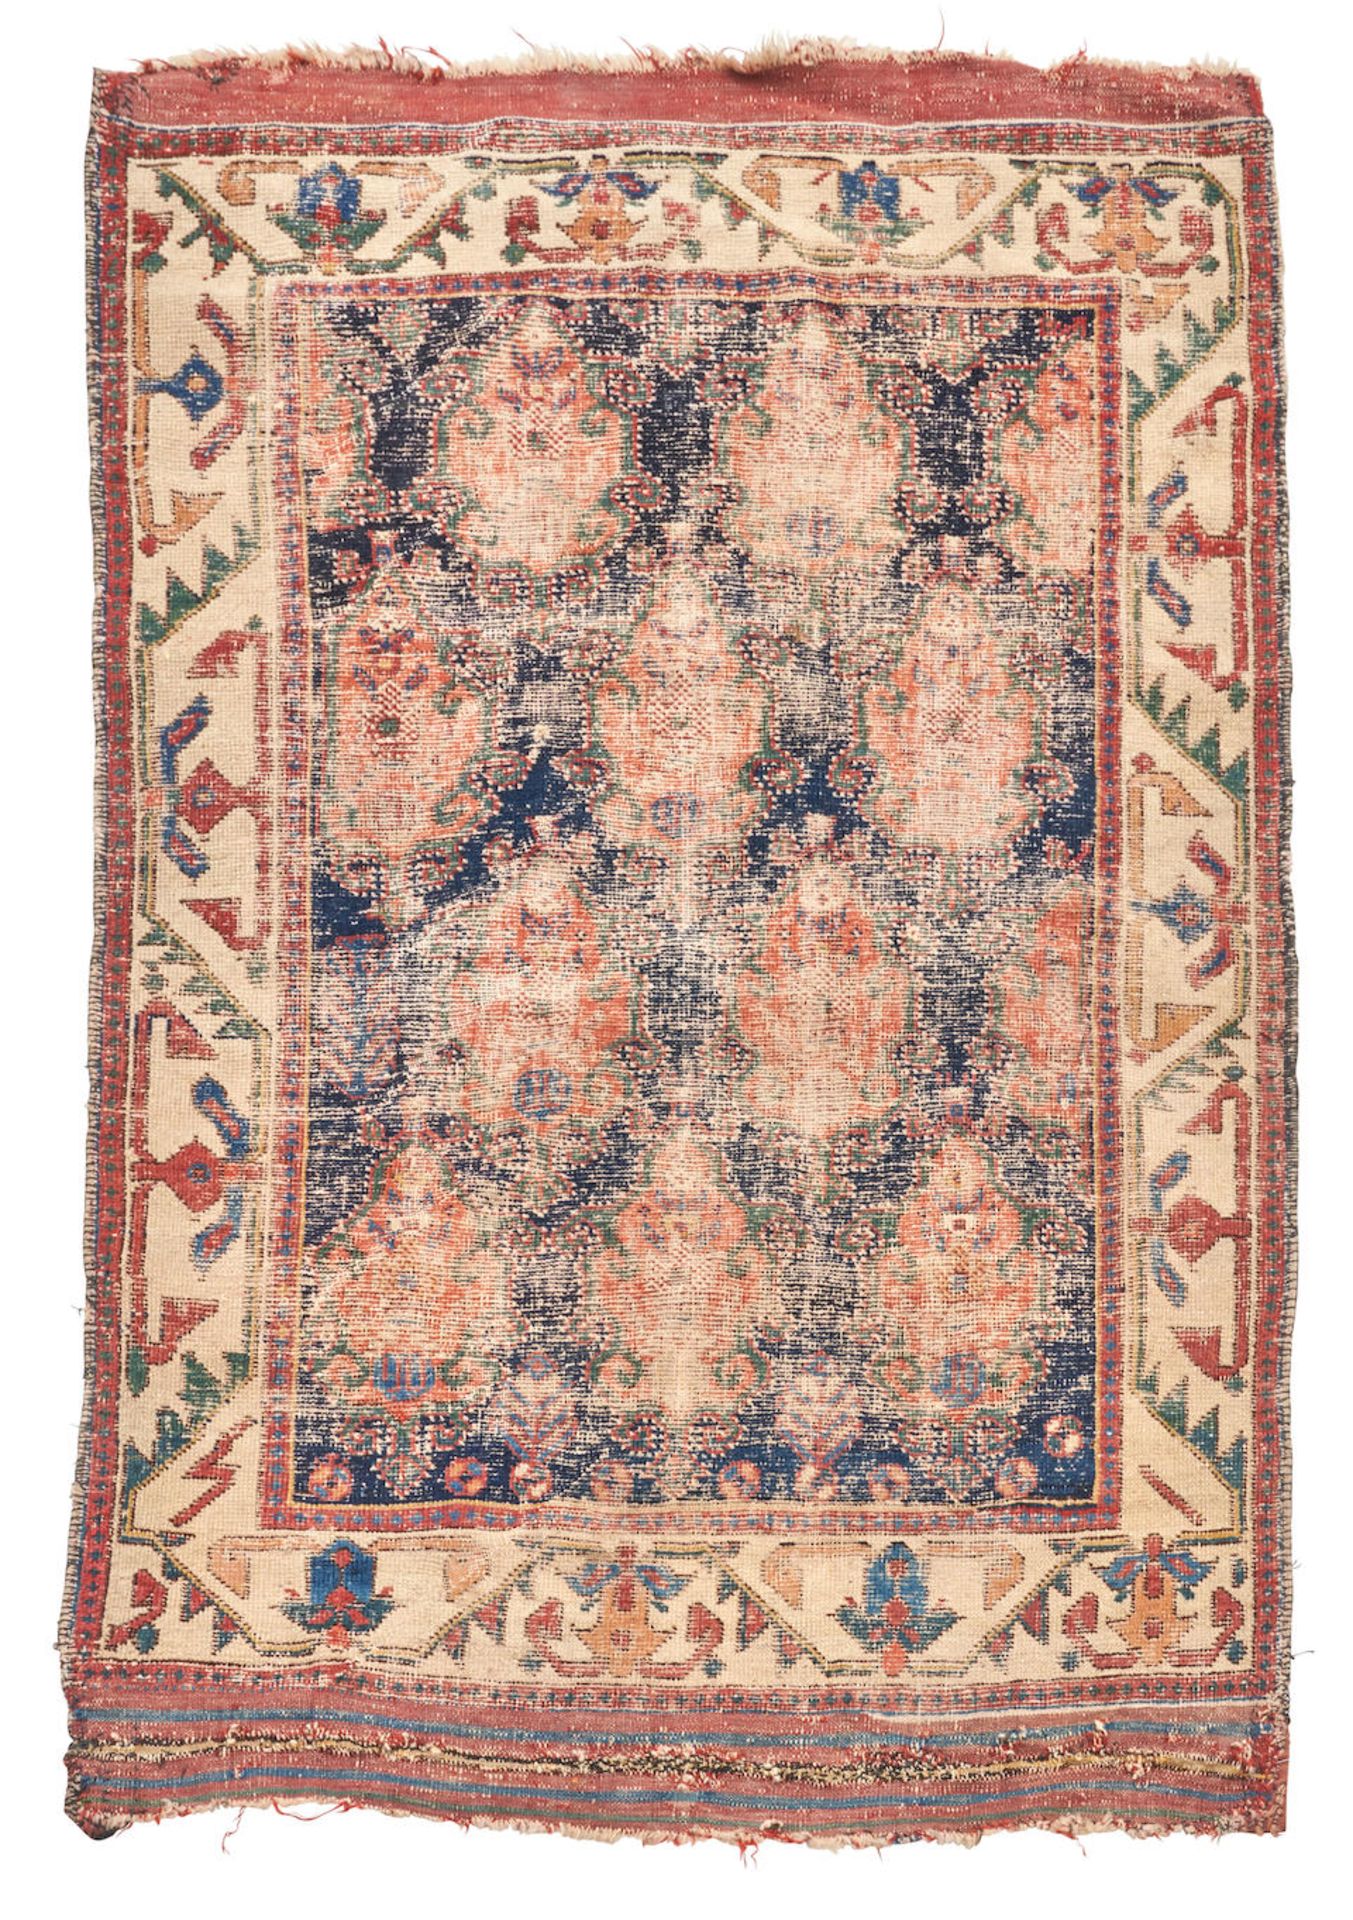 Early Afshar Rug Iran 3 ft. 6 in. x 5 ft. 5 in.